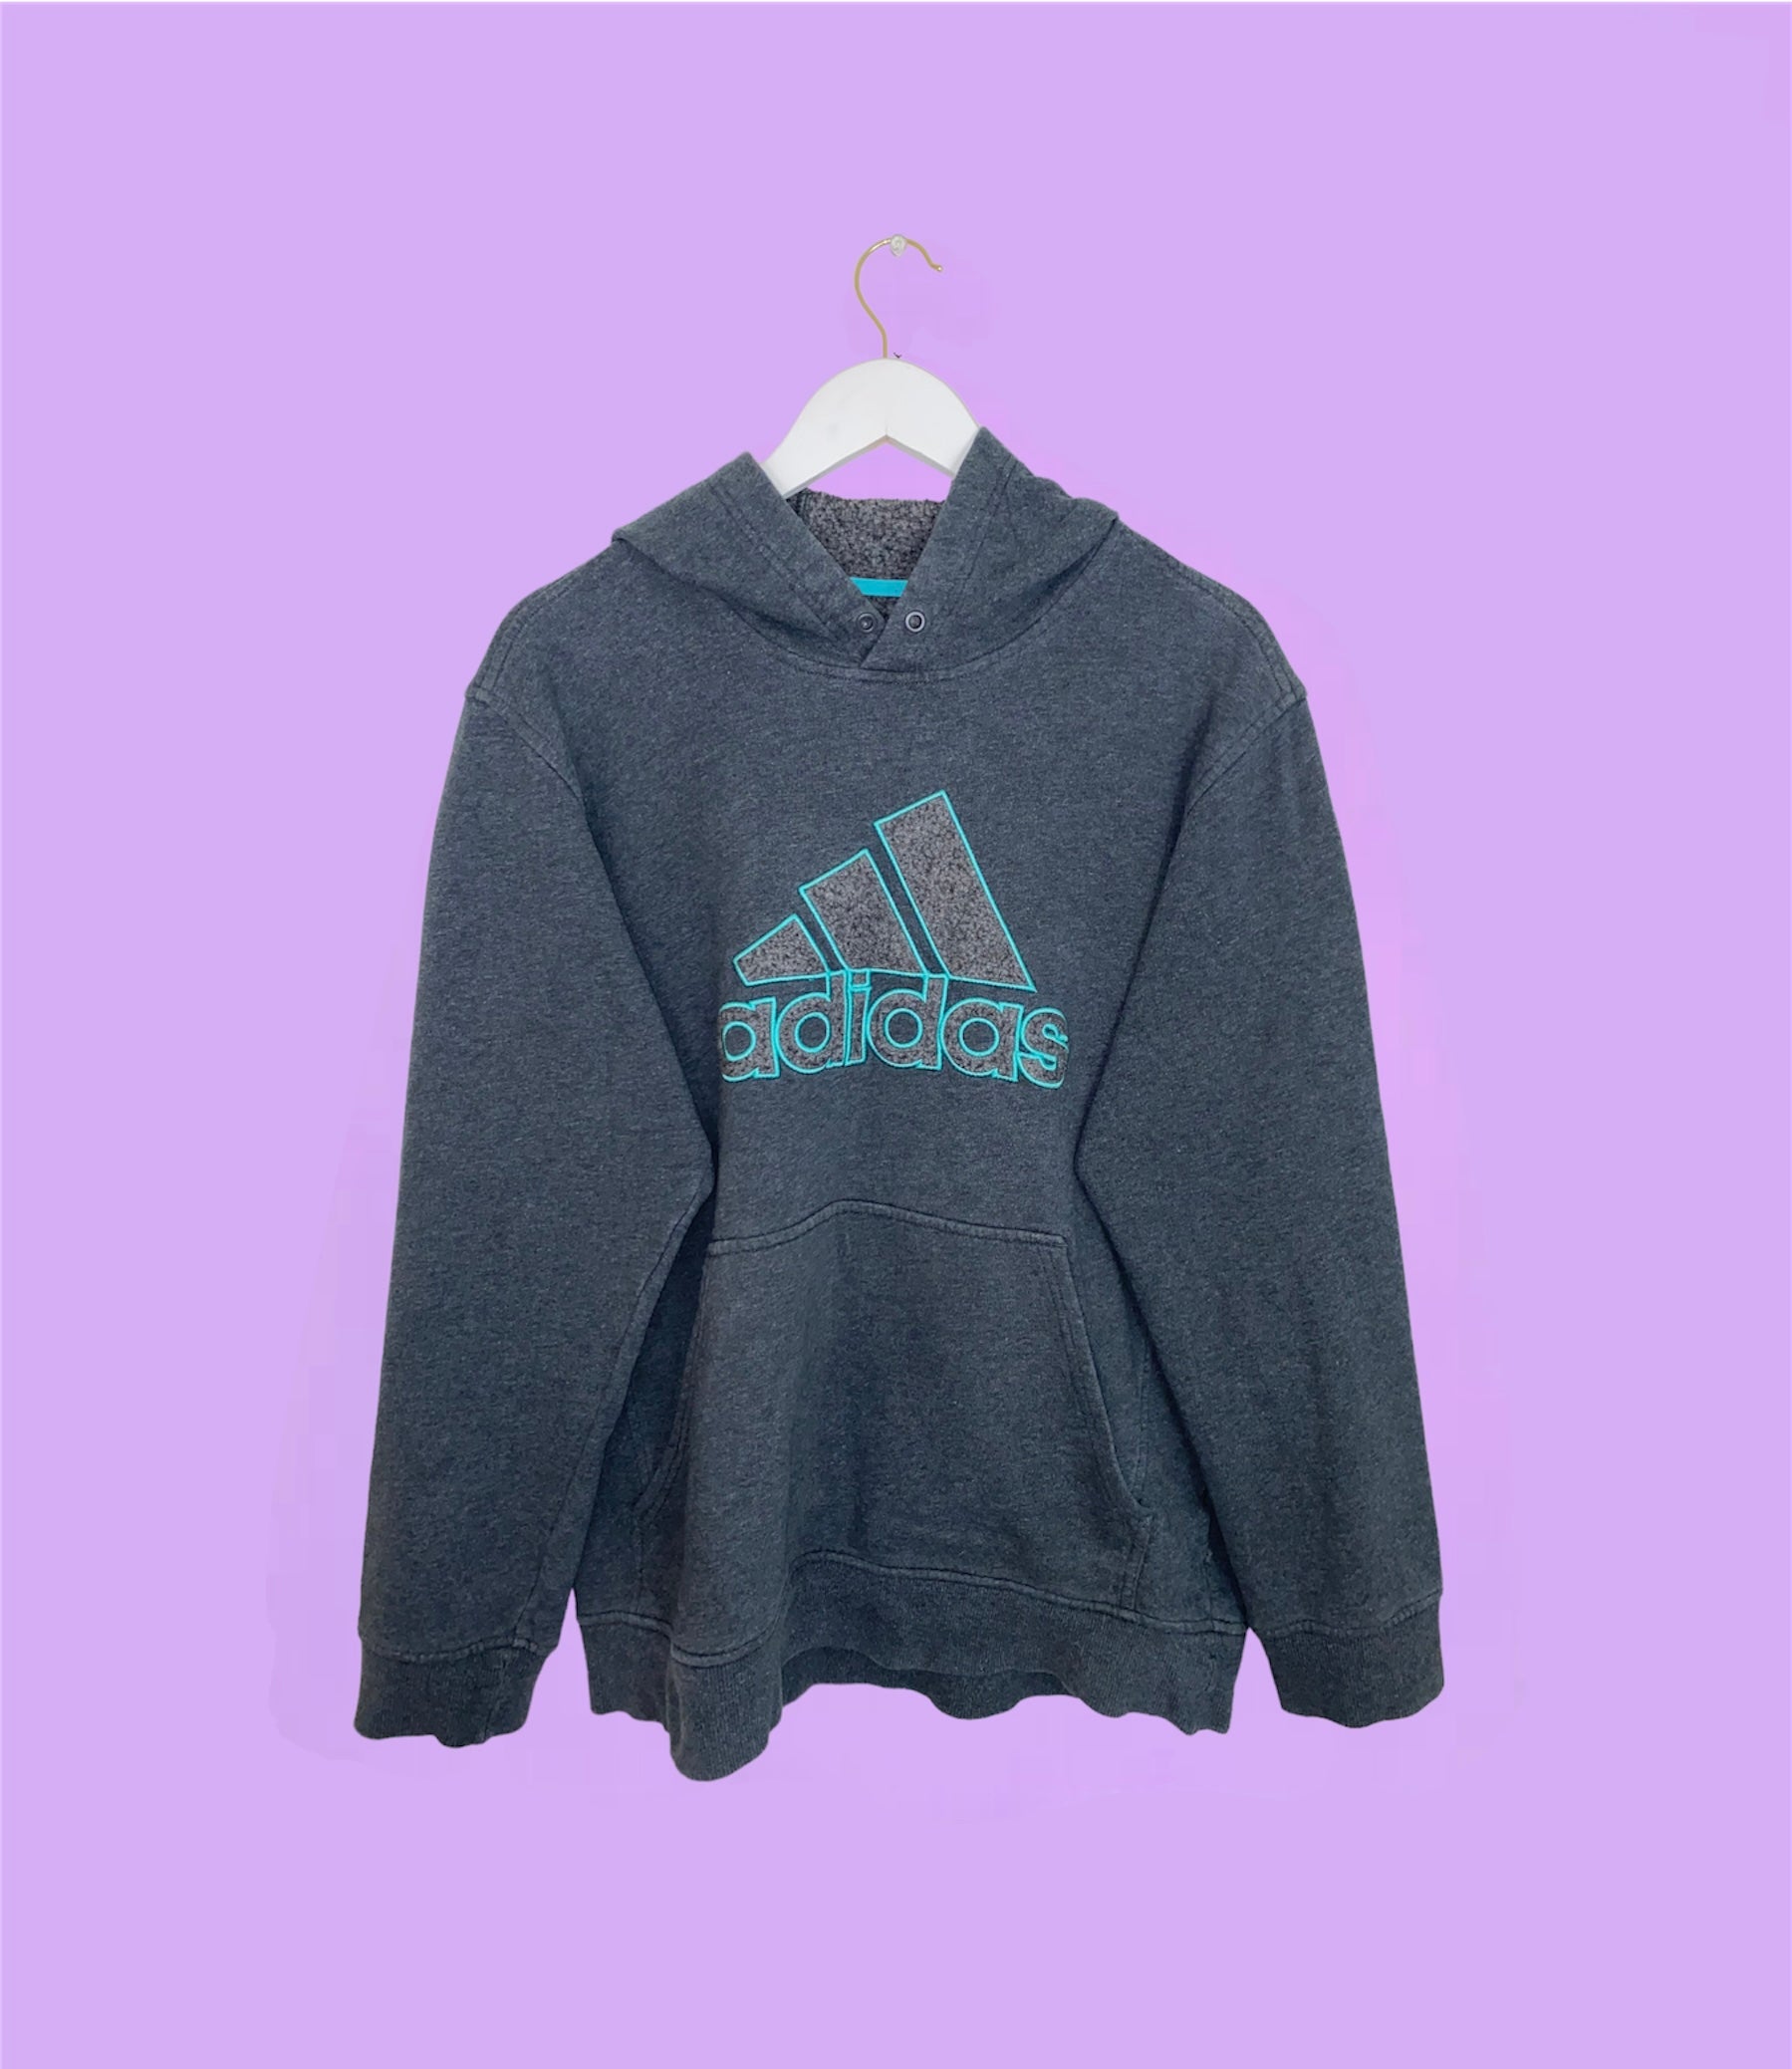 grey hoodie with blue adidas big text logo shown on a lilac background